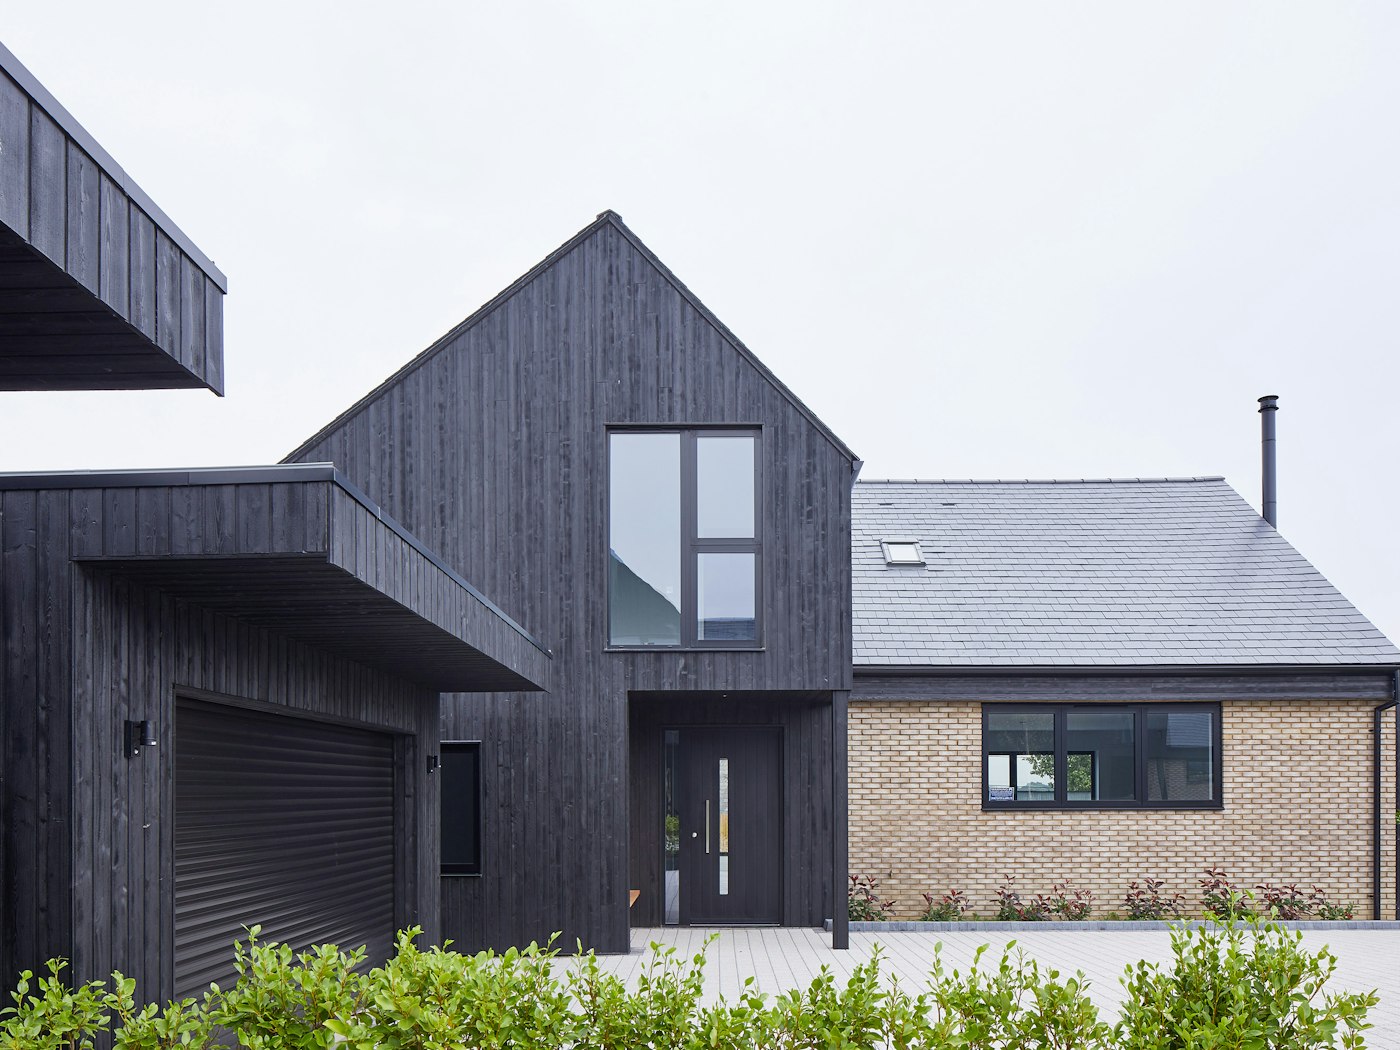 Urban Front's black painted Terano doorsets work well with the charred cladding in this development